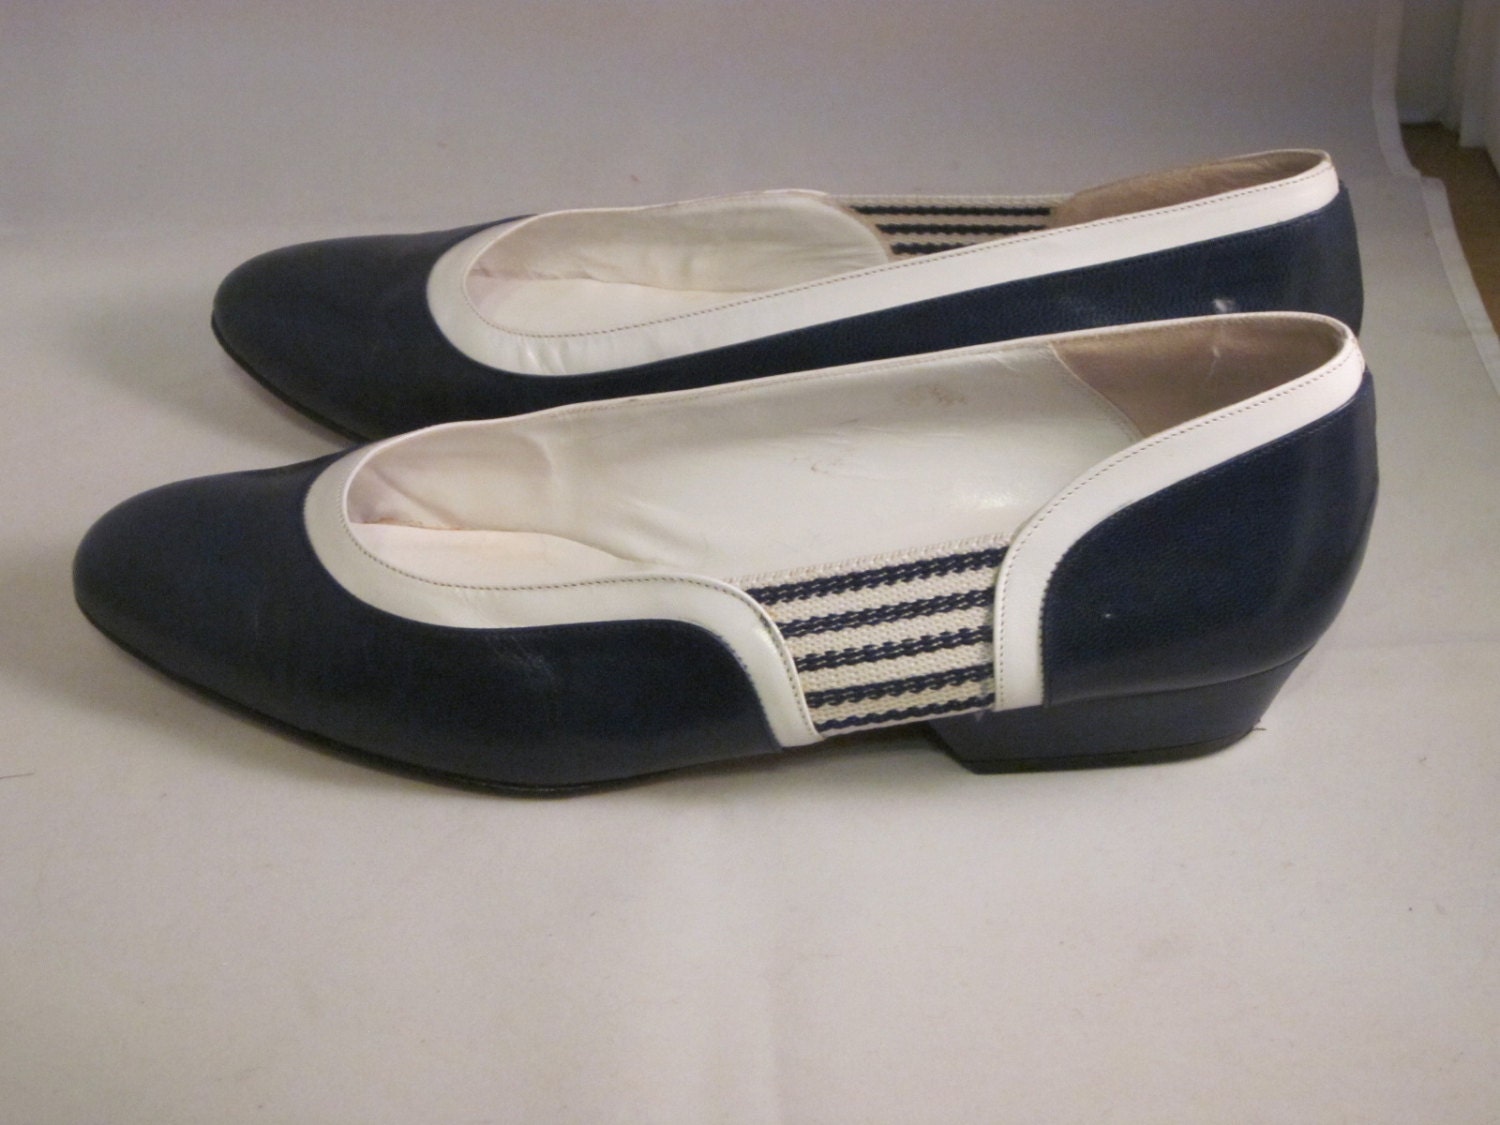 Vintage Polly Bergen Navy With White Trim 1980's Pumps Made in Italy ...